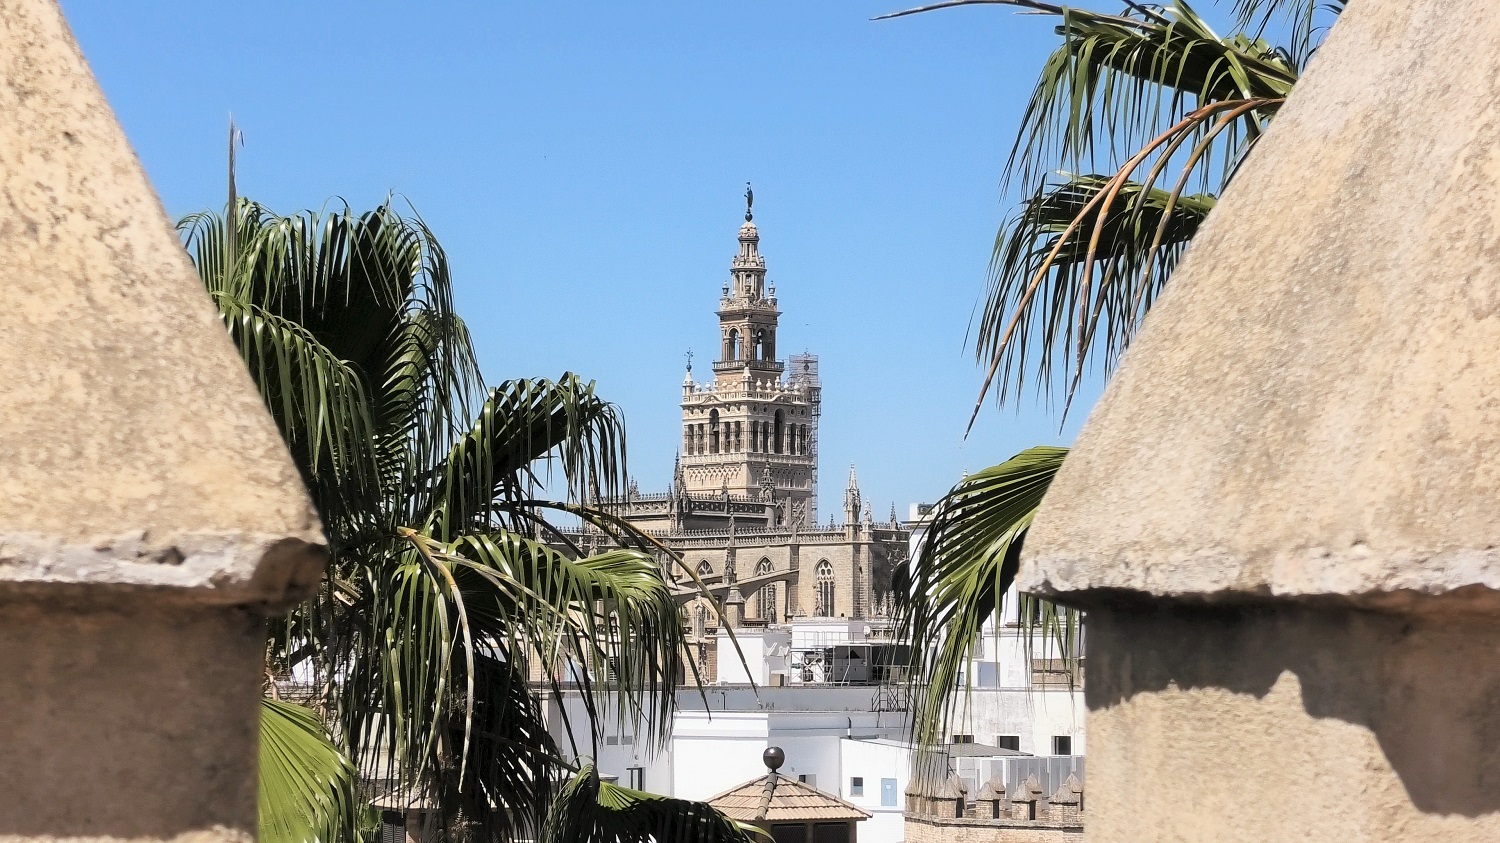 The Giralda bell tower in the city of Seville